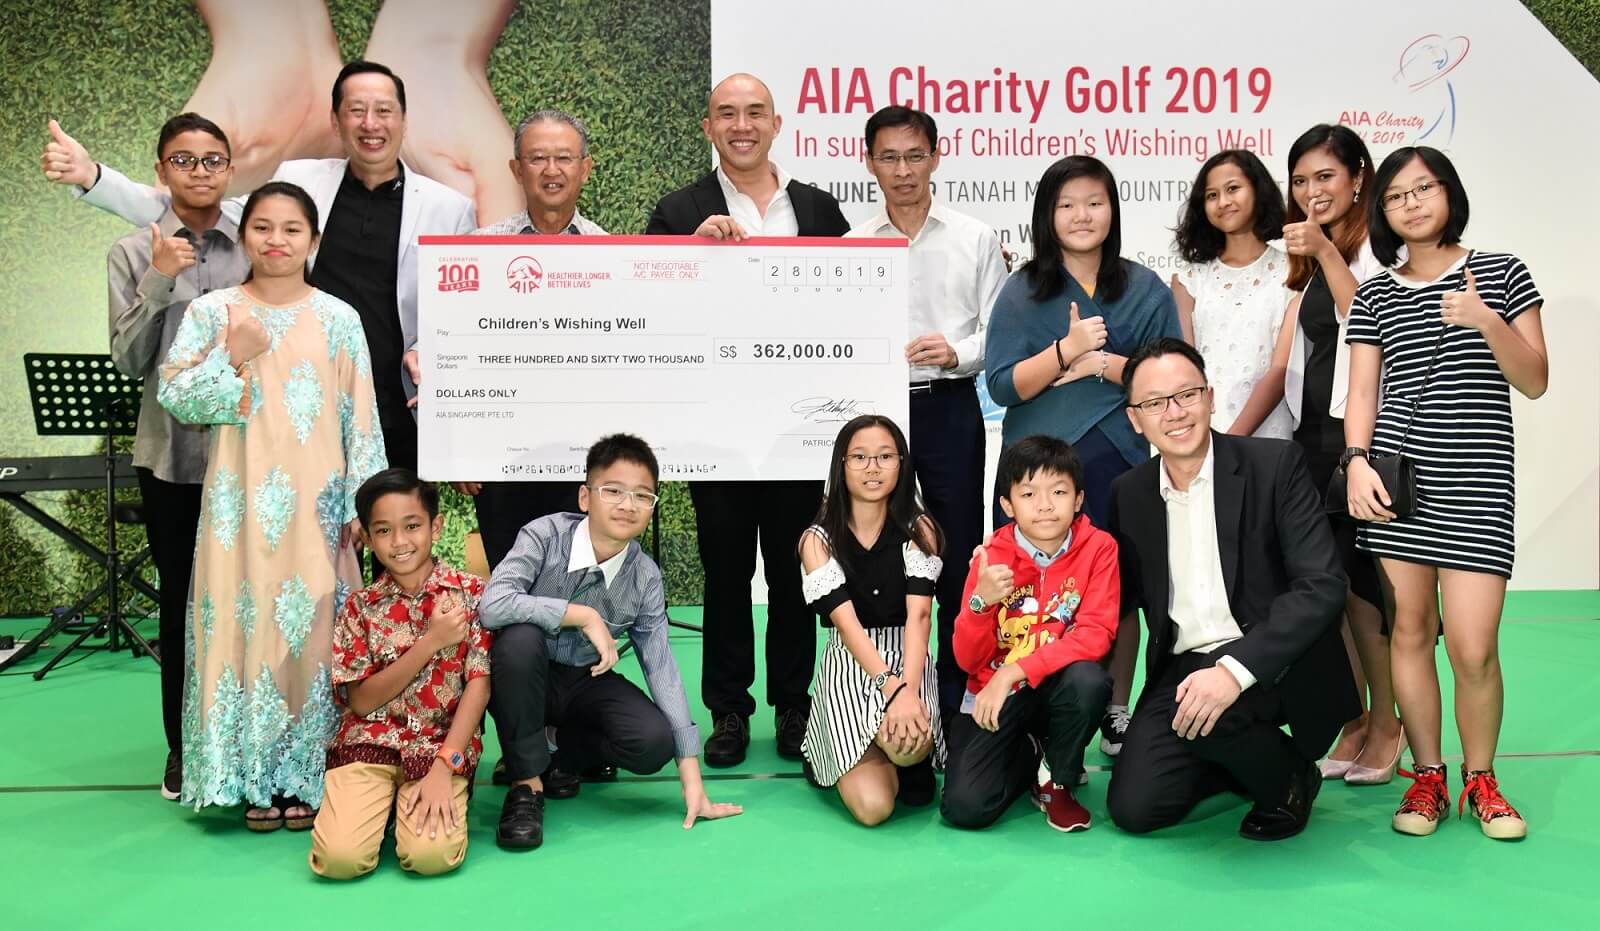 AIA Charity Golf 2019 Group Photo